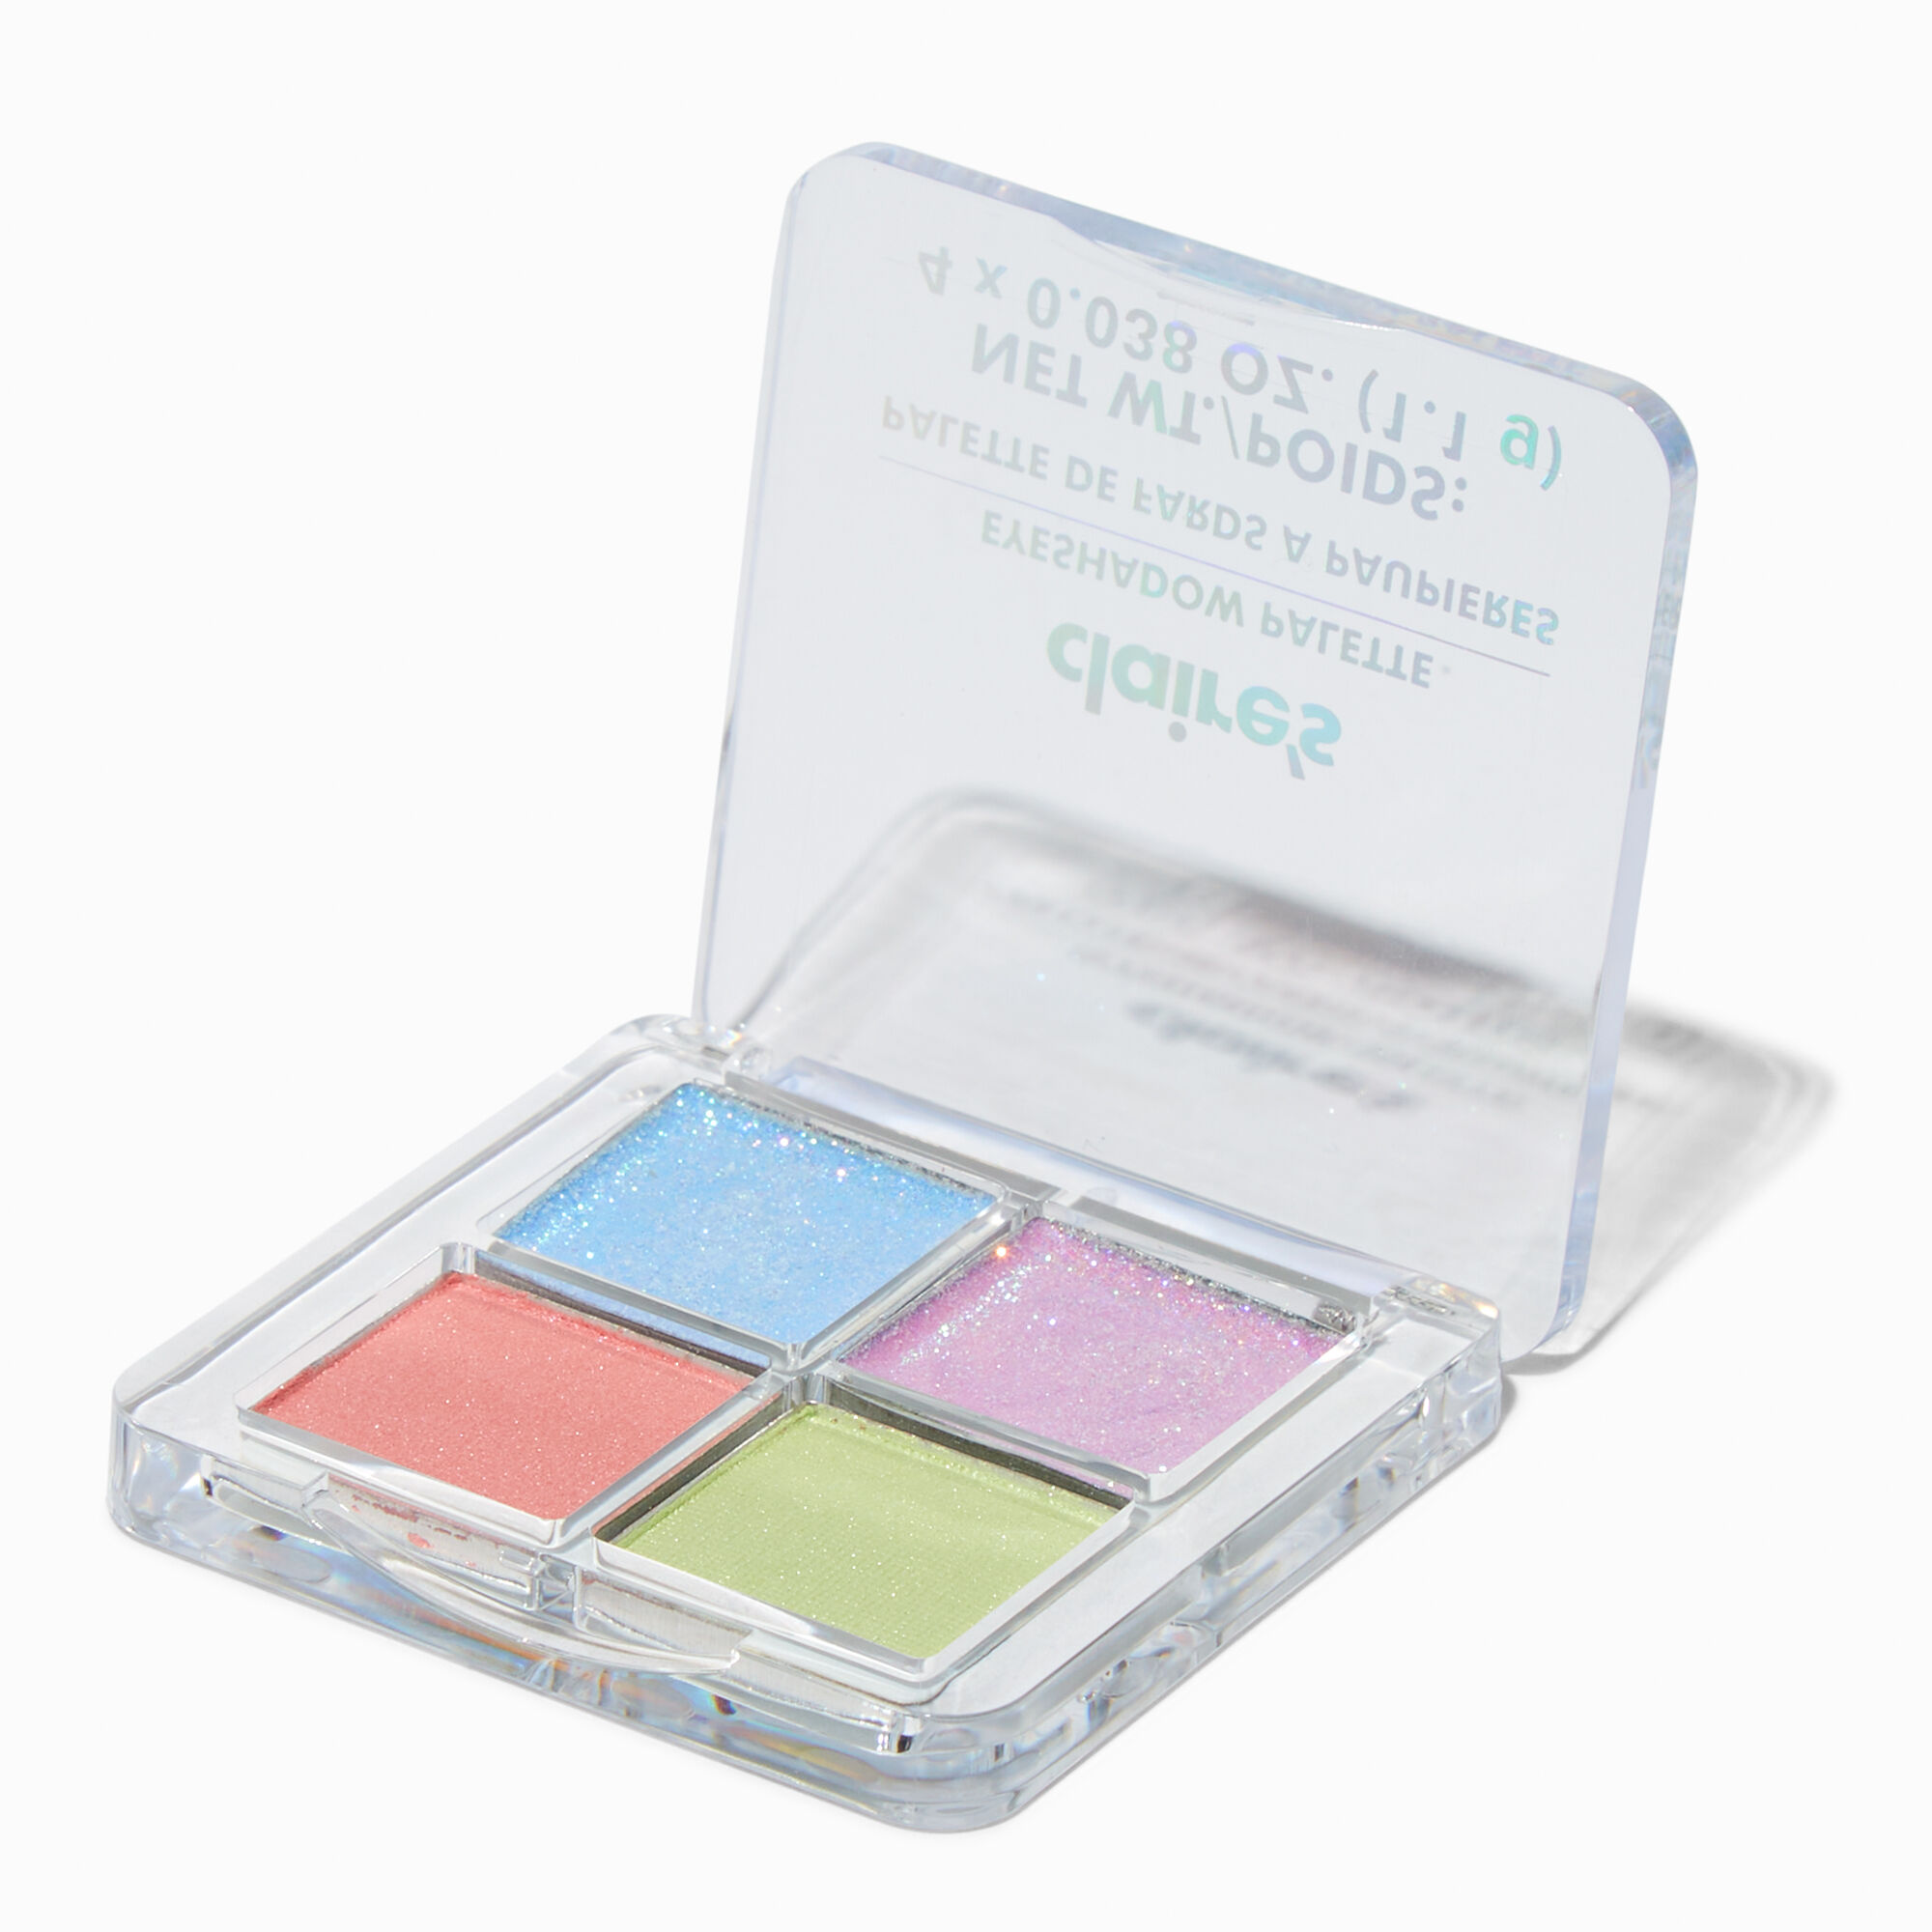 View Claires Pastel Shimmer Quad Eyeshadow Palette information